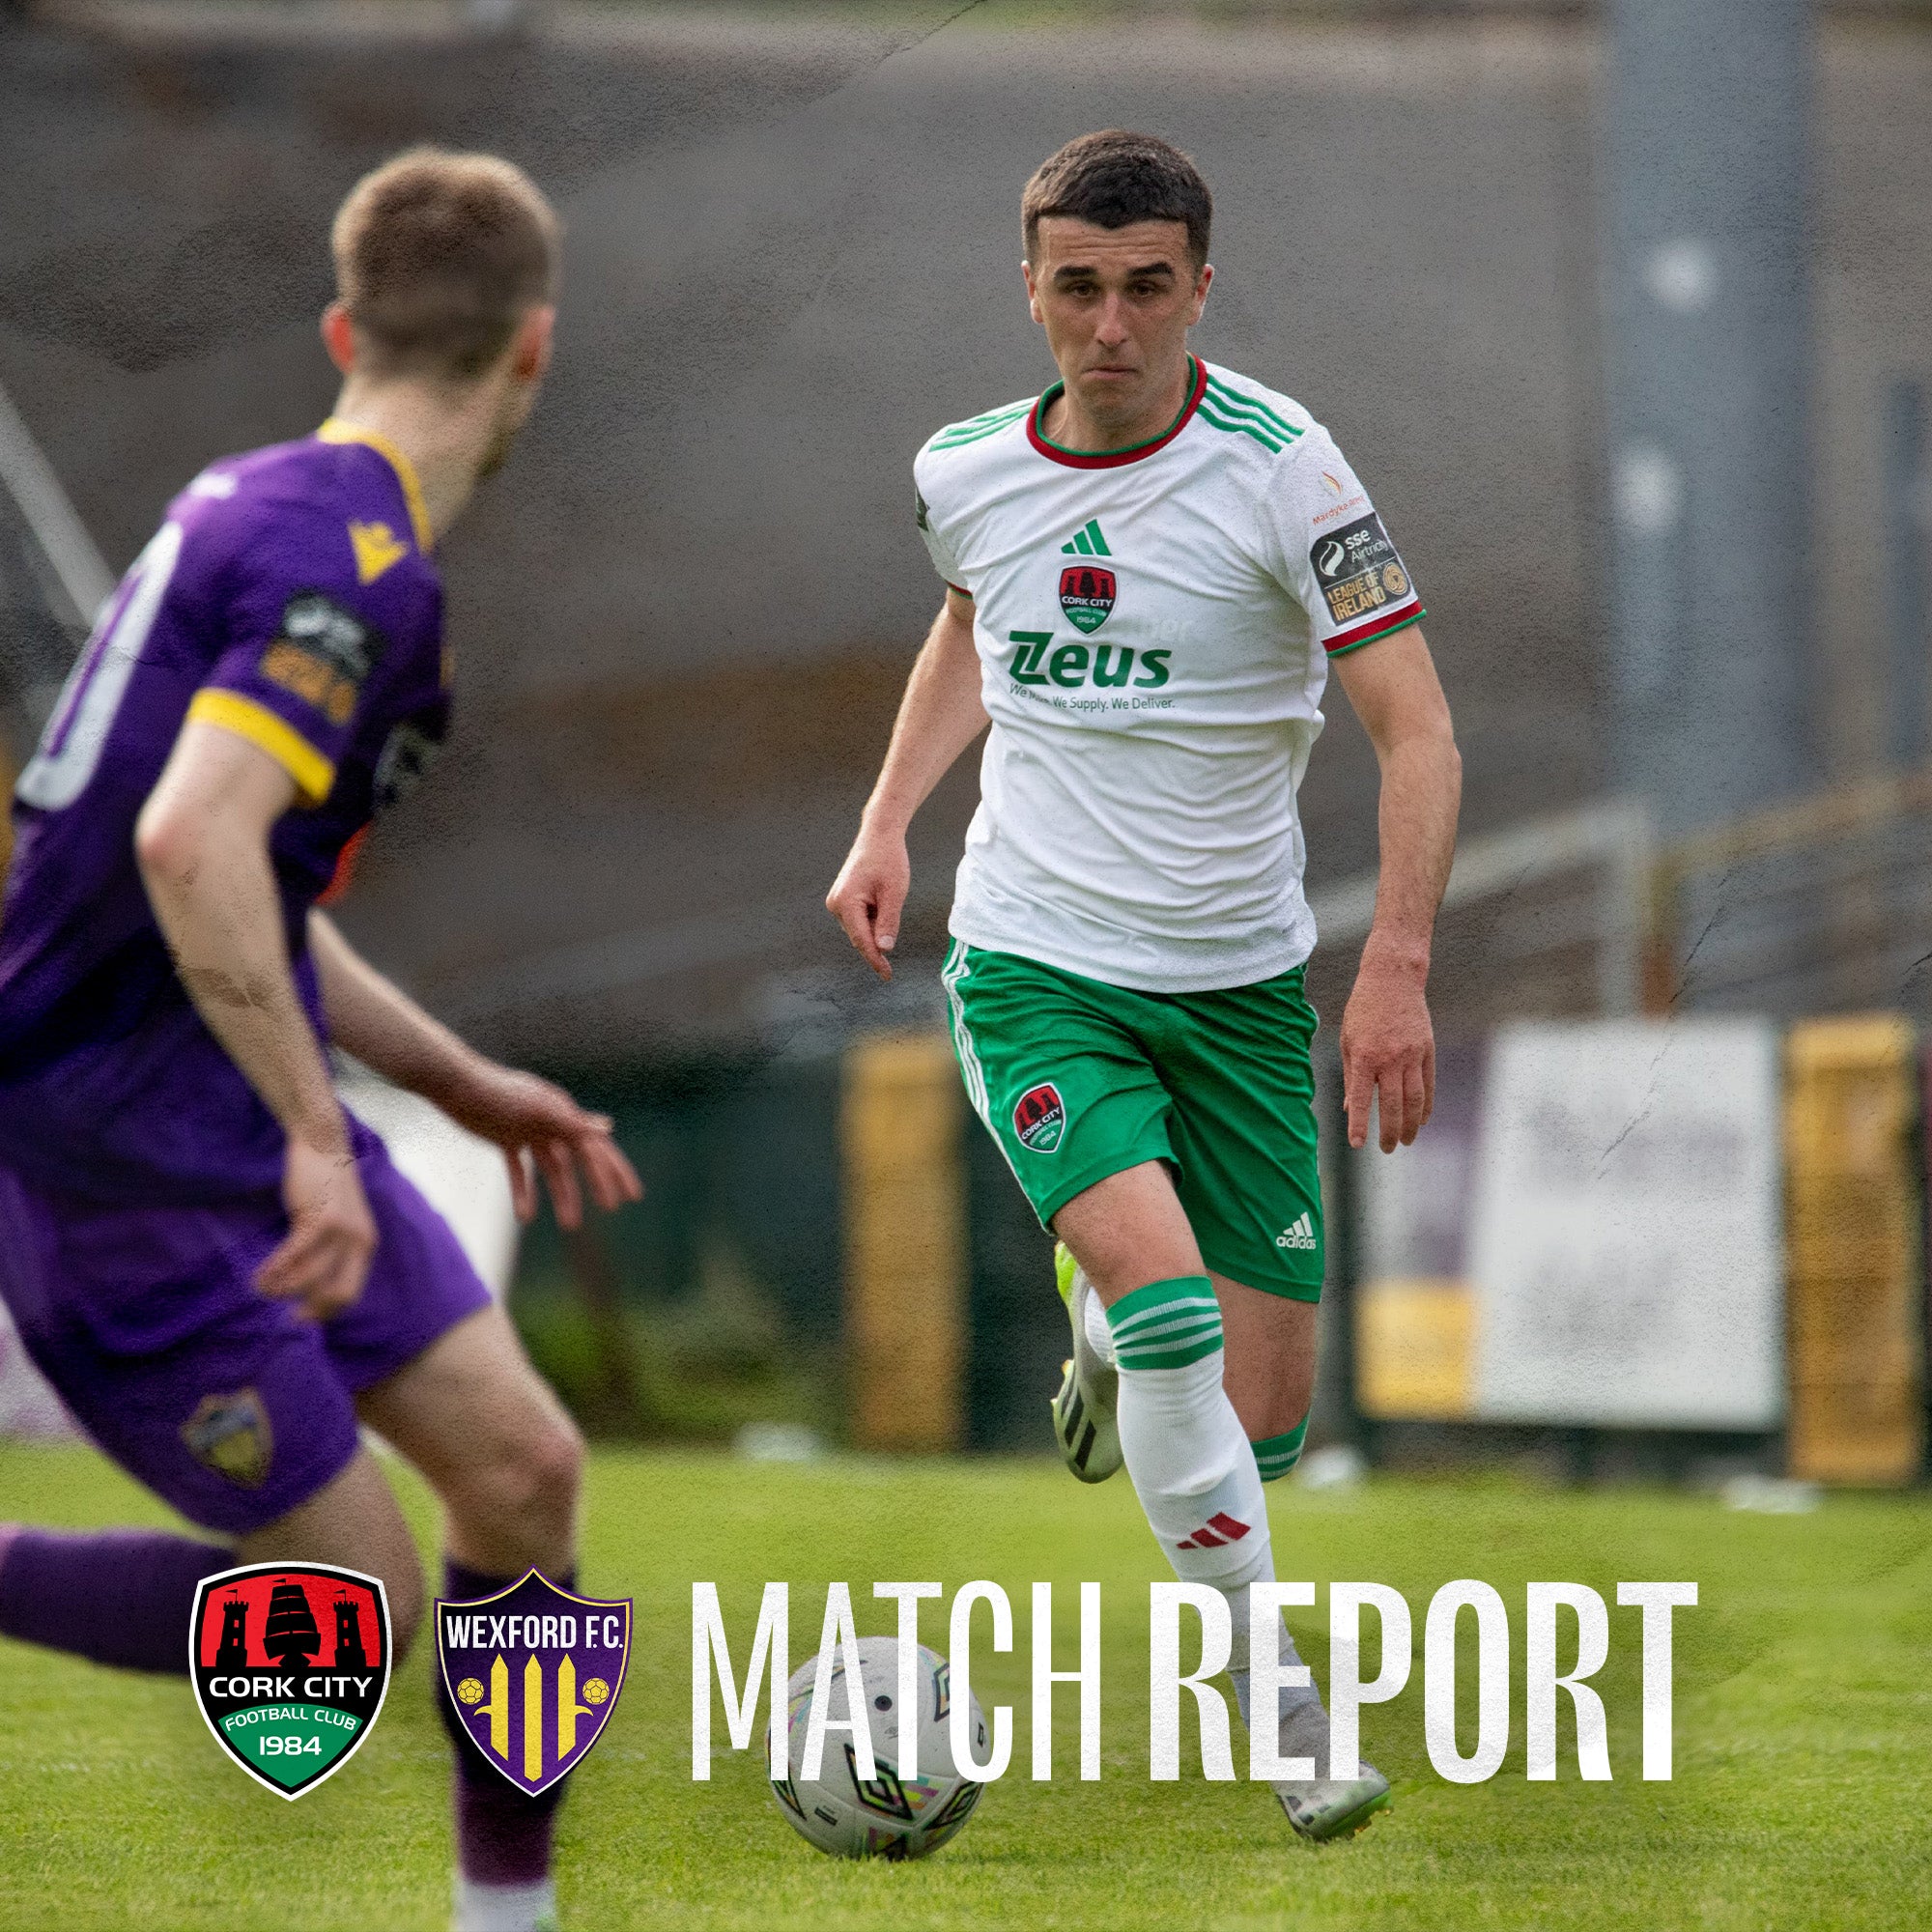 Match Report: City 1-1 Wexford